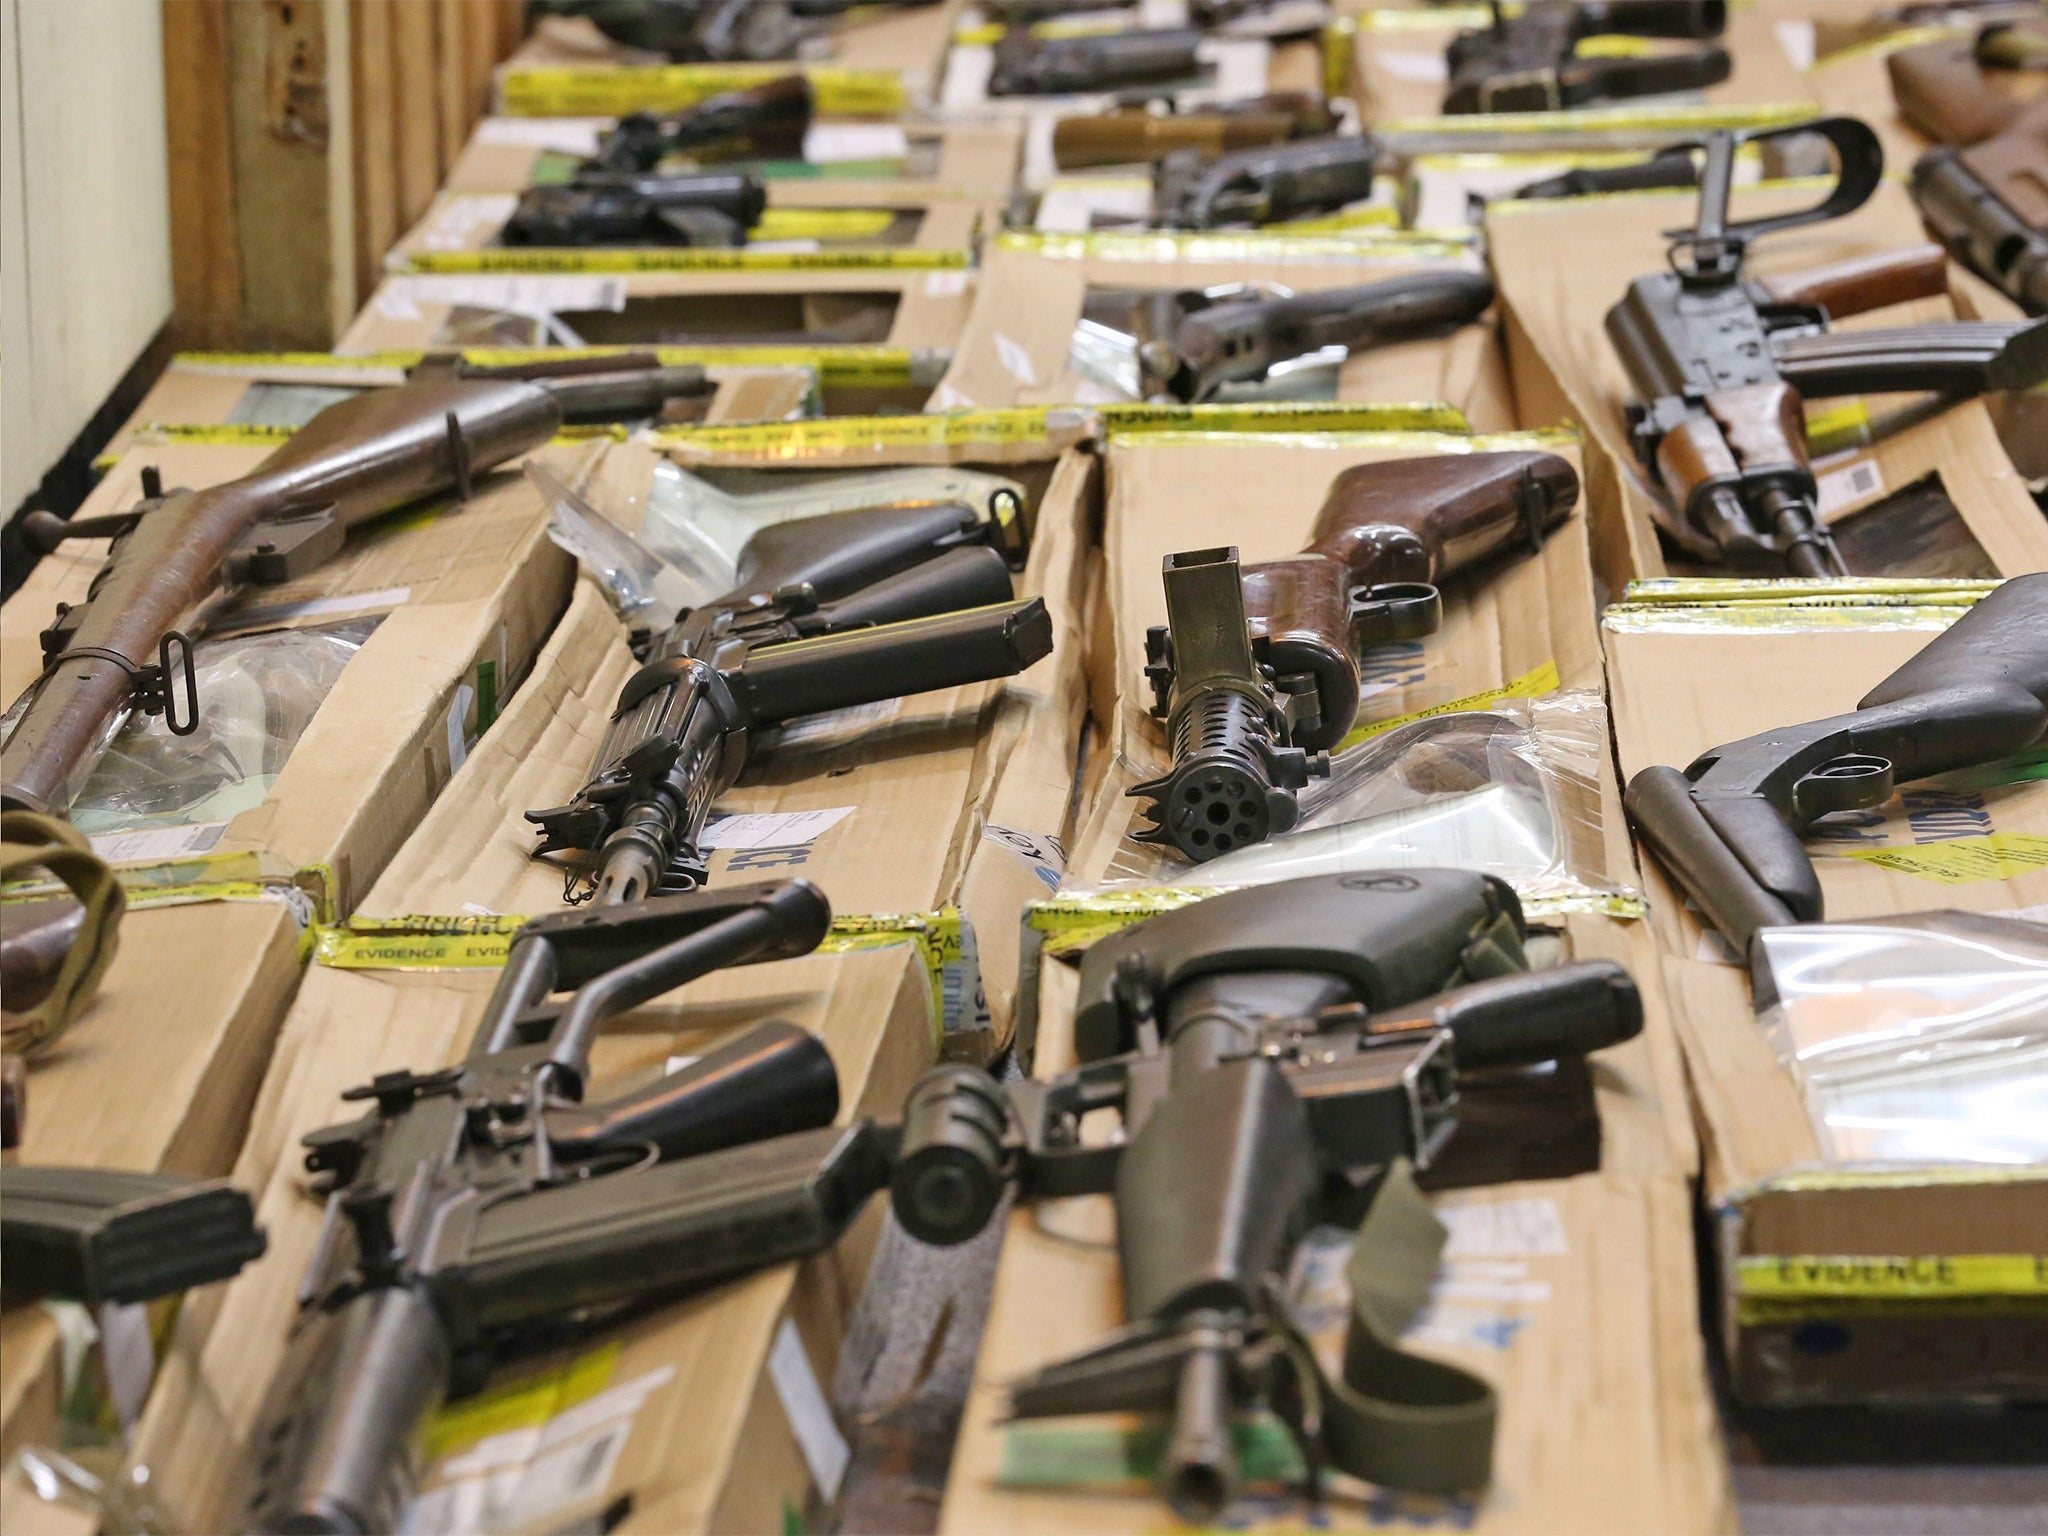 More than 20 universities are fighting the new law which allows concealed weapons on campus